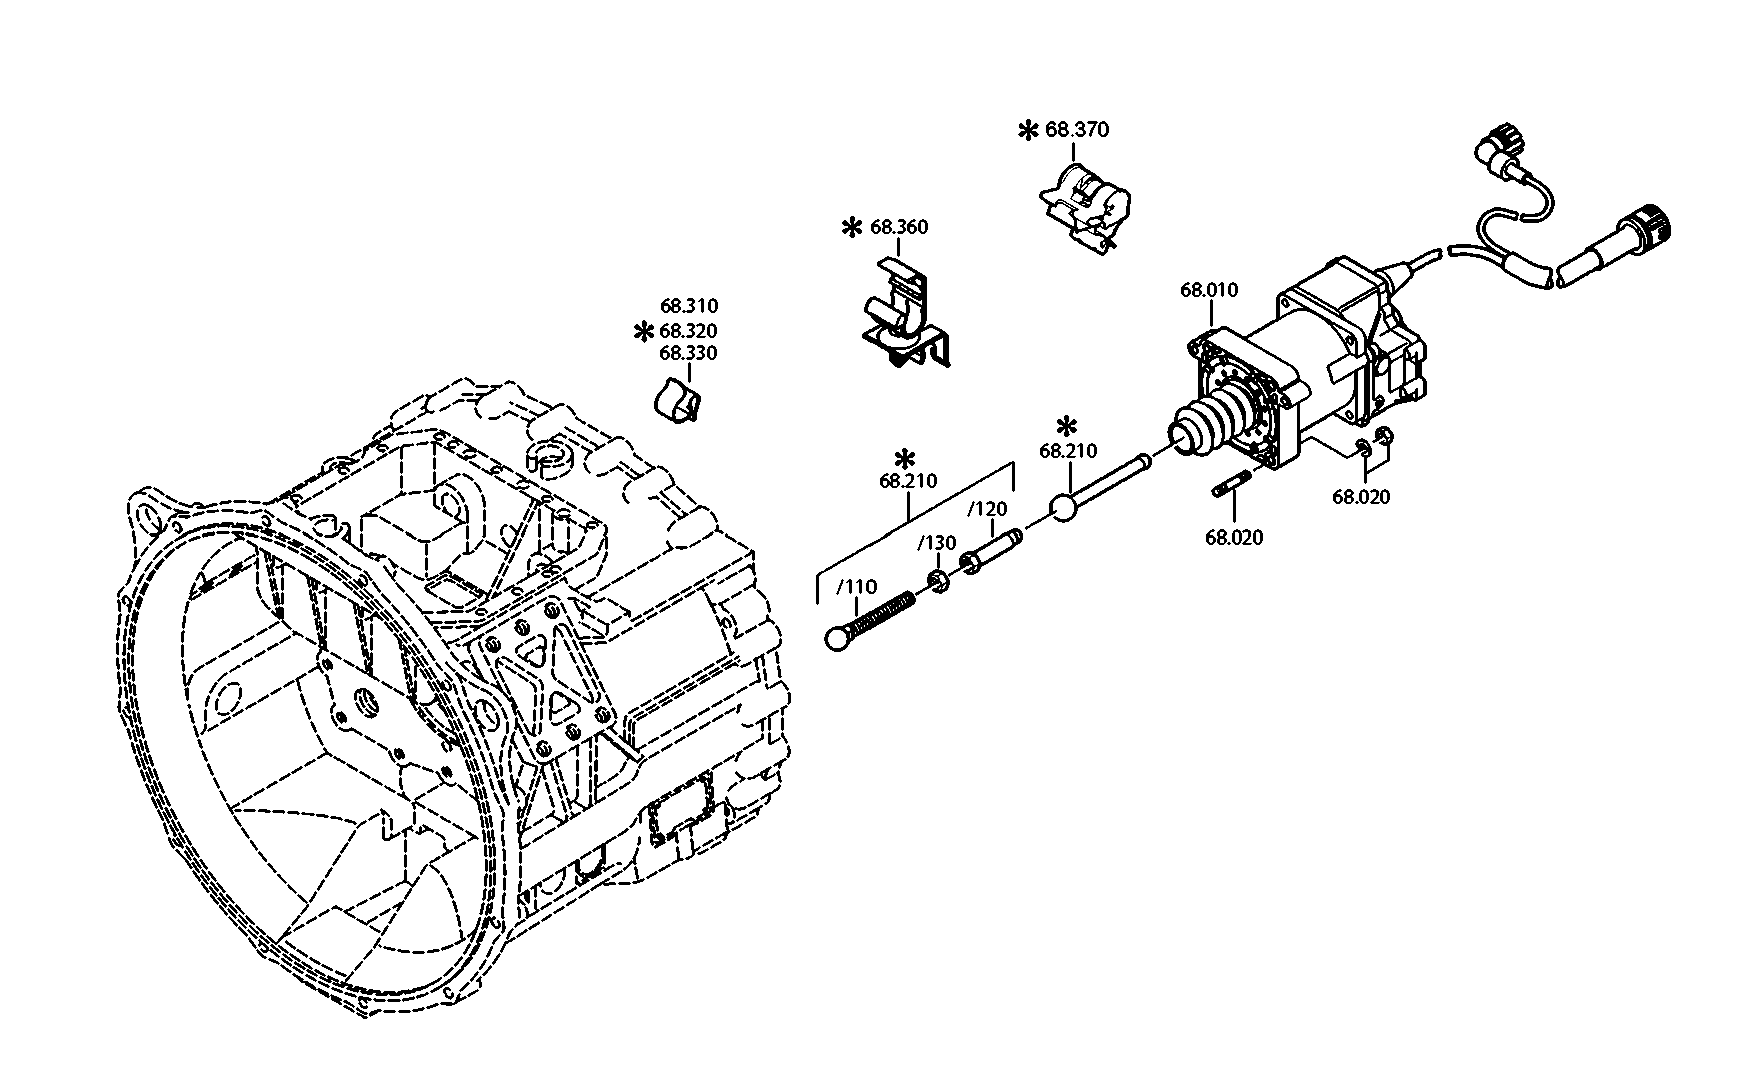 drawing for Manitowoc Crane Group Germany 03324716 - RELEASE DEVICE (figure 4)